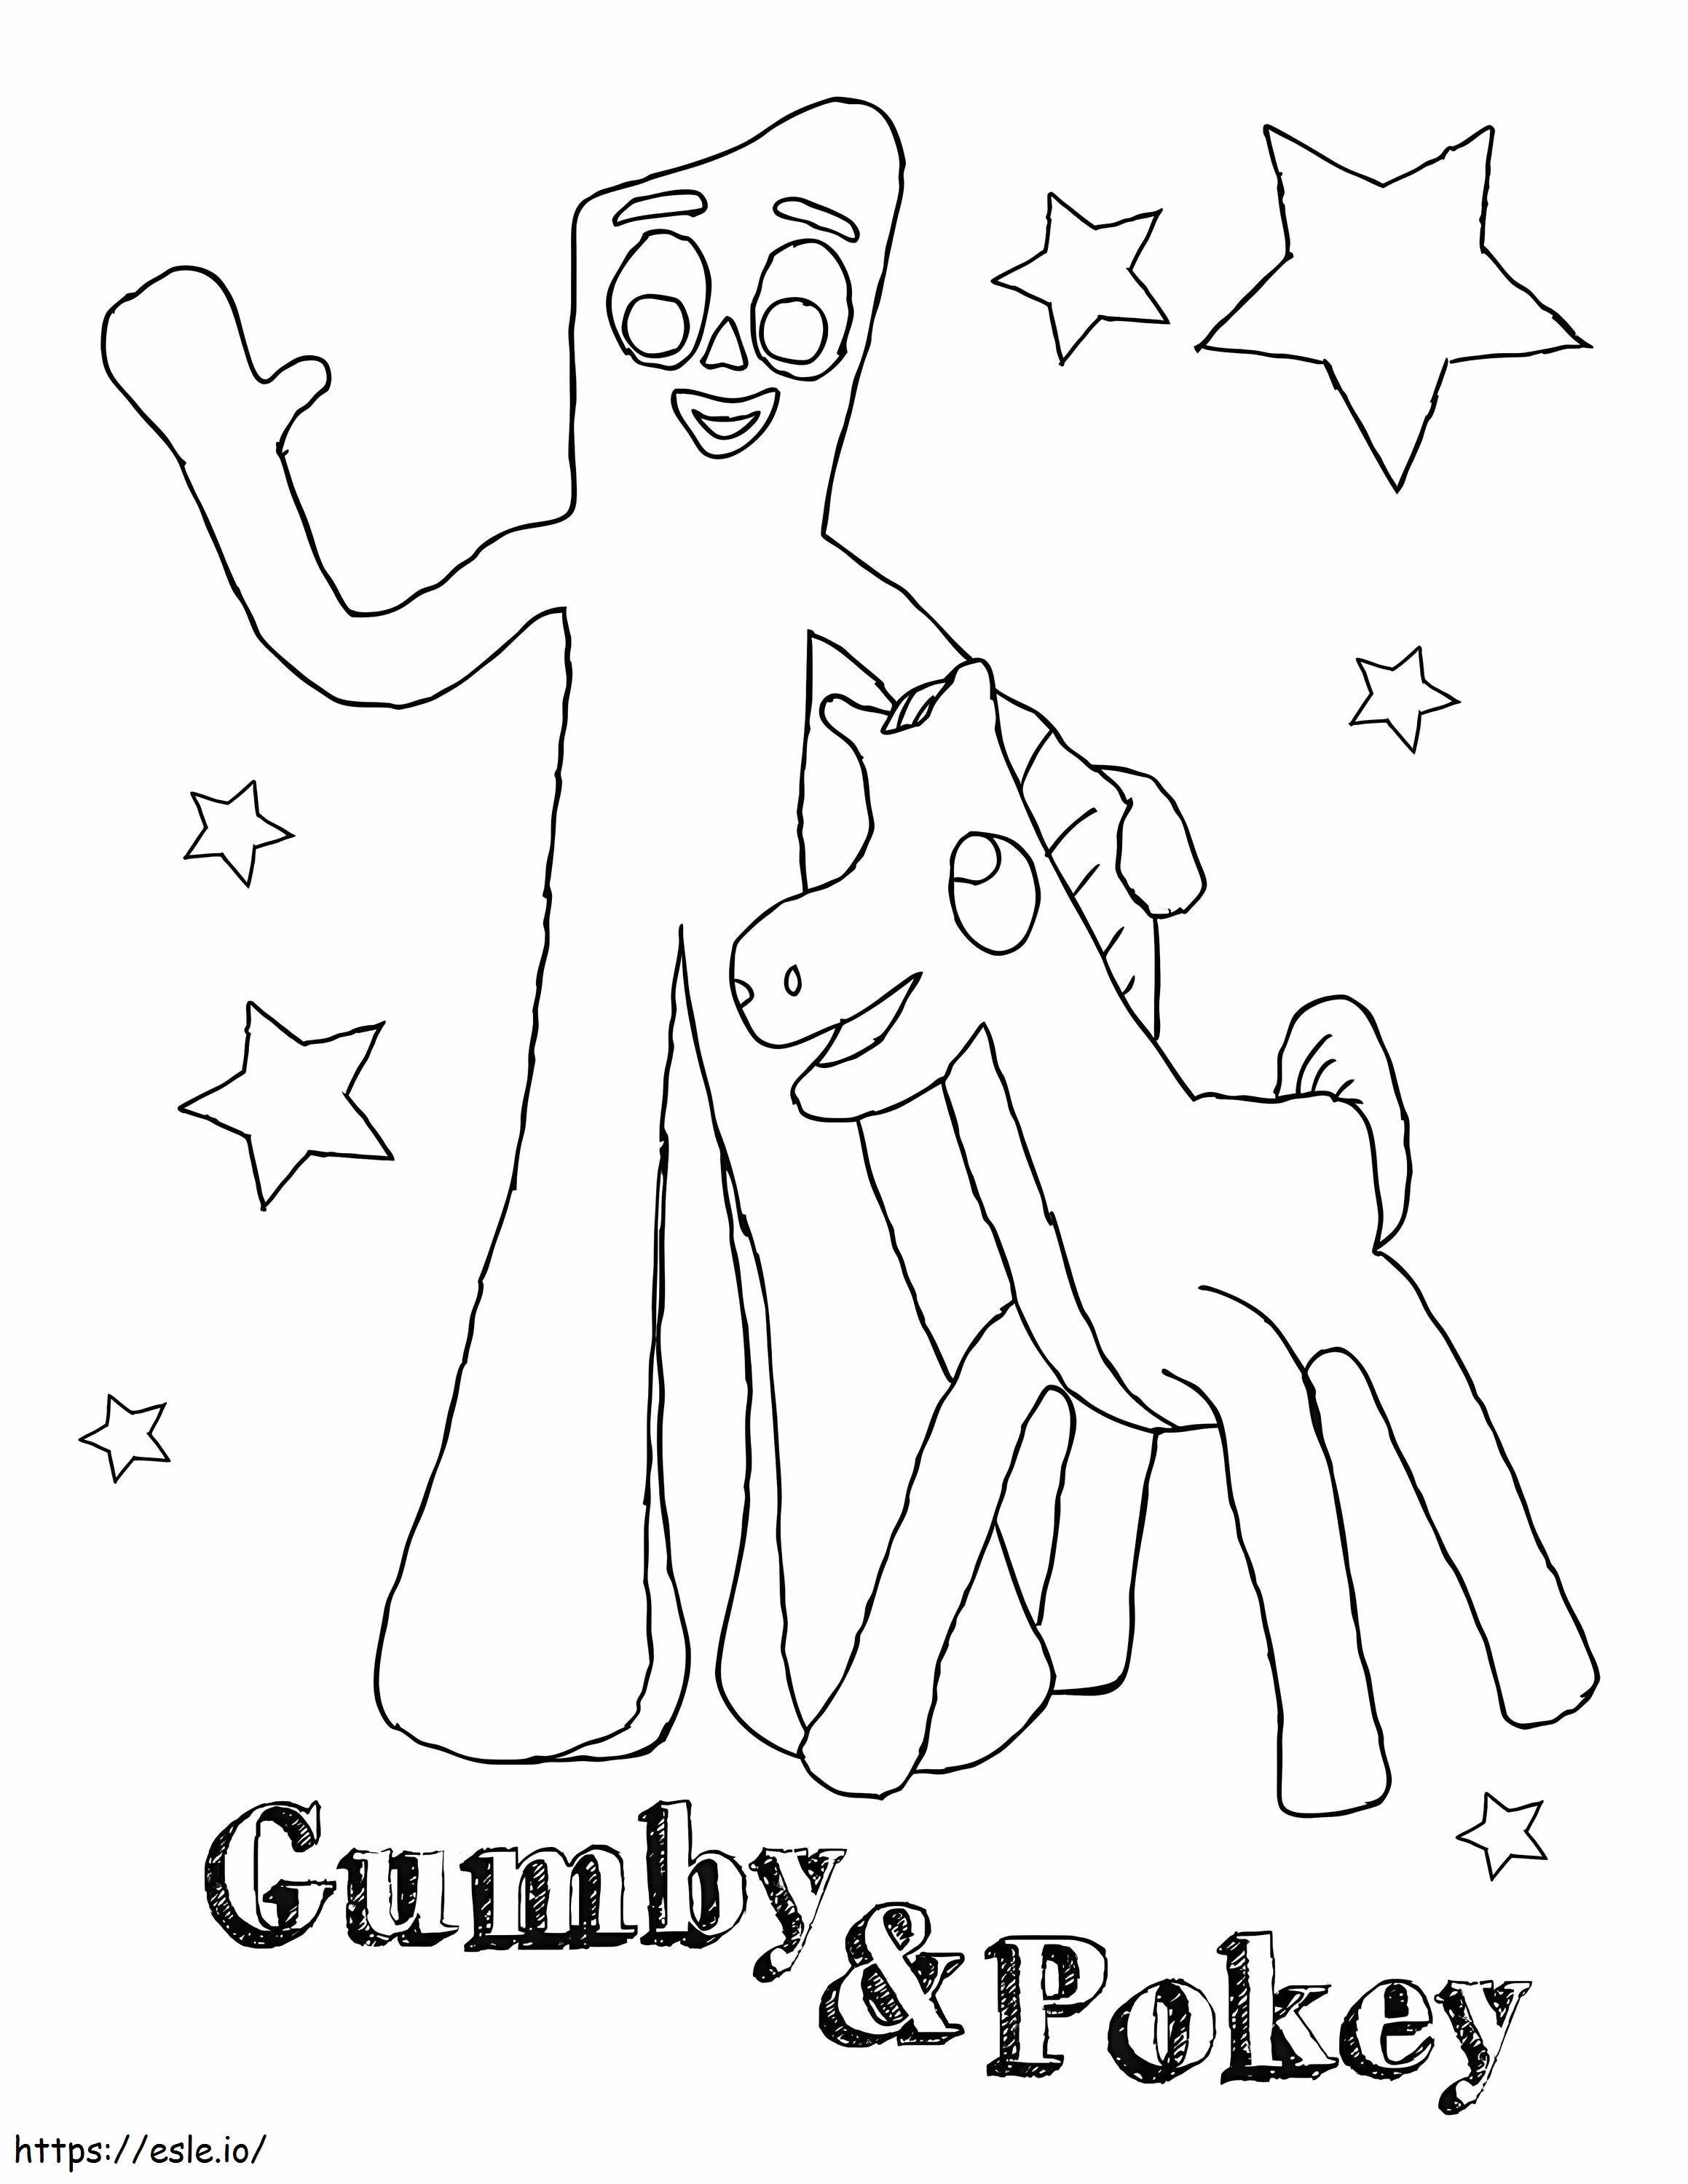 Gumby And Pokey coloring page